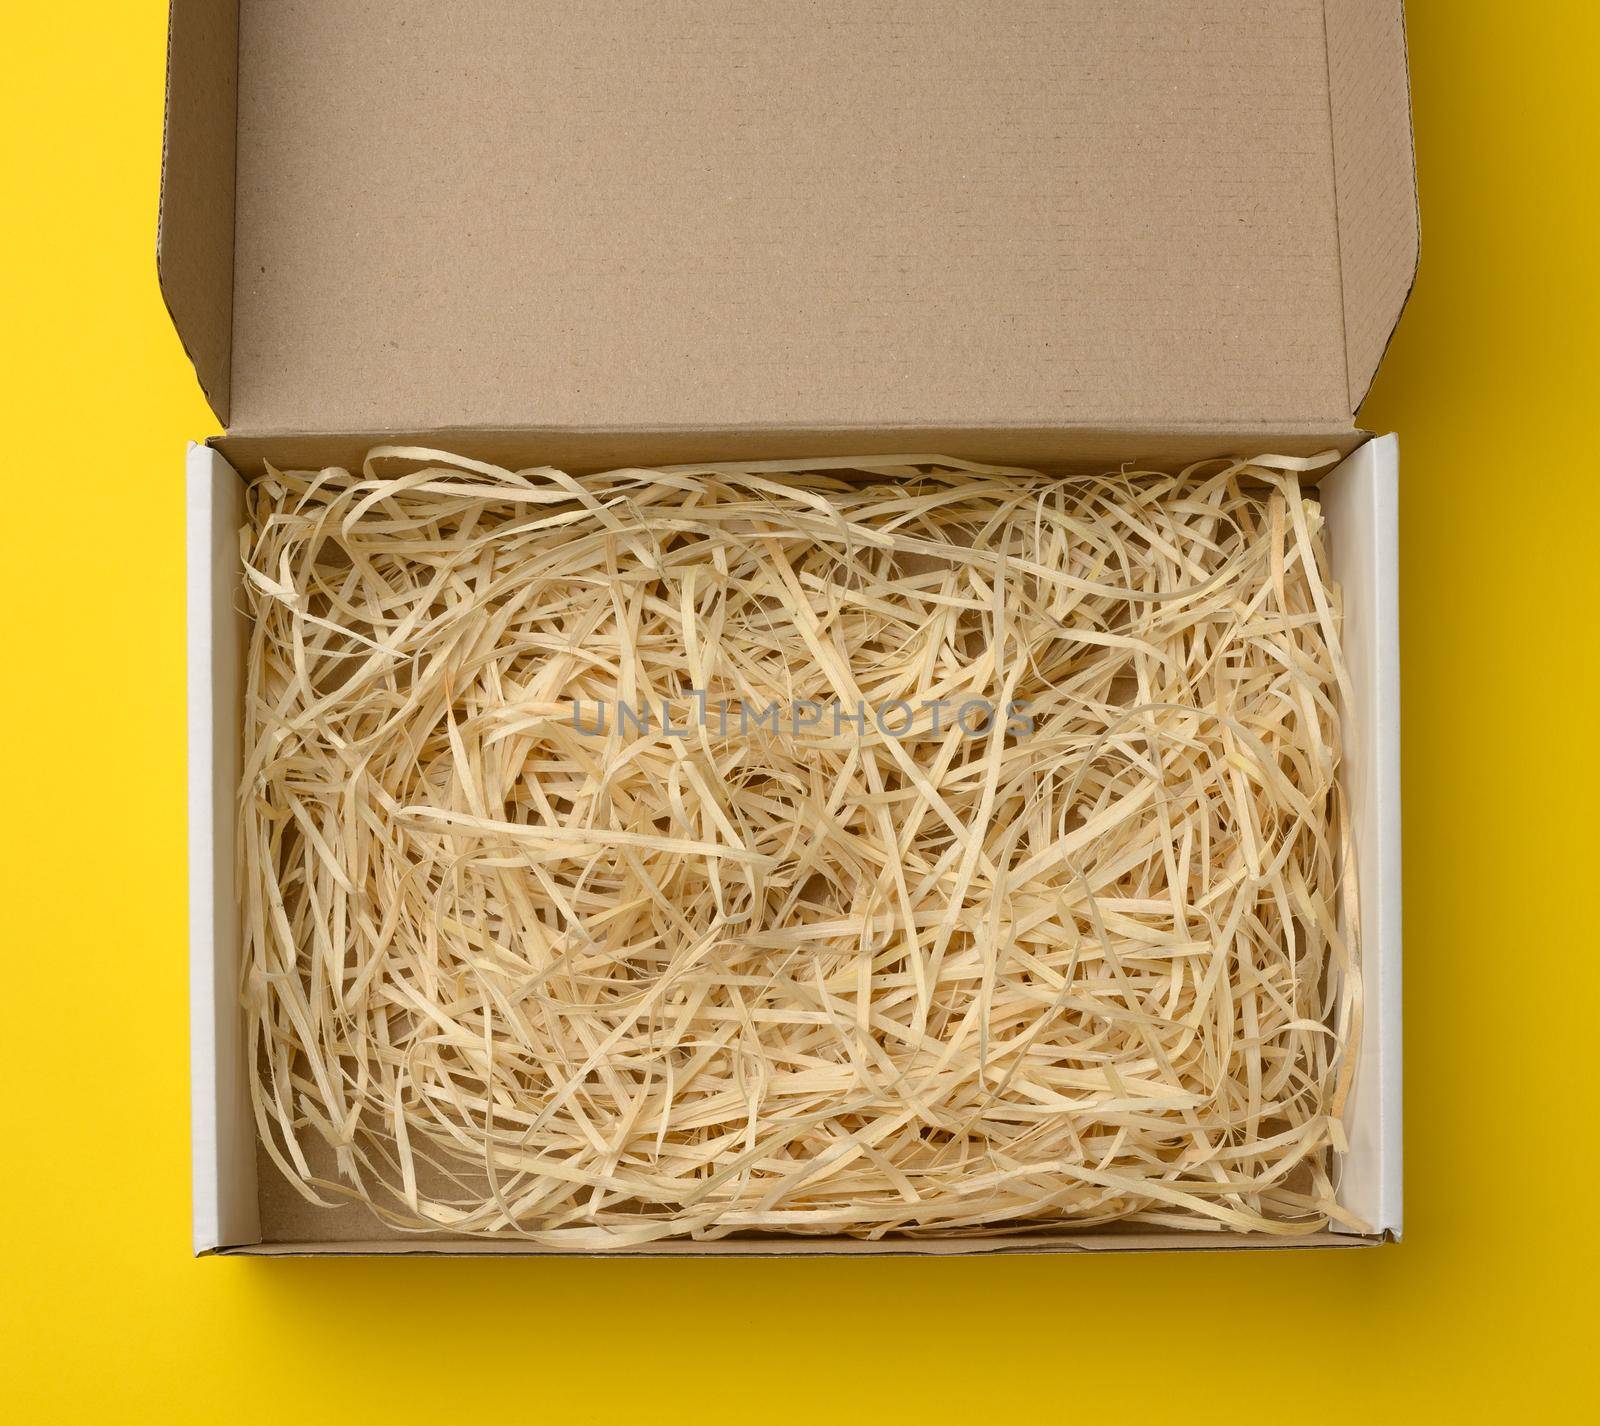 empty rectangular open corrugated paper box with sawdust inside. Packaging, containers for transportation on a yellow background